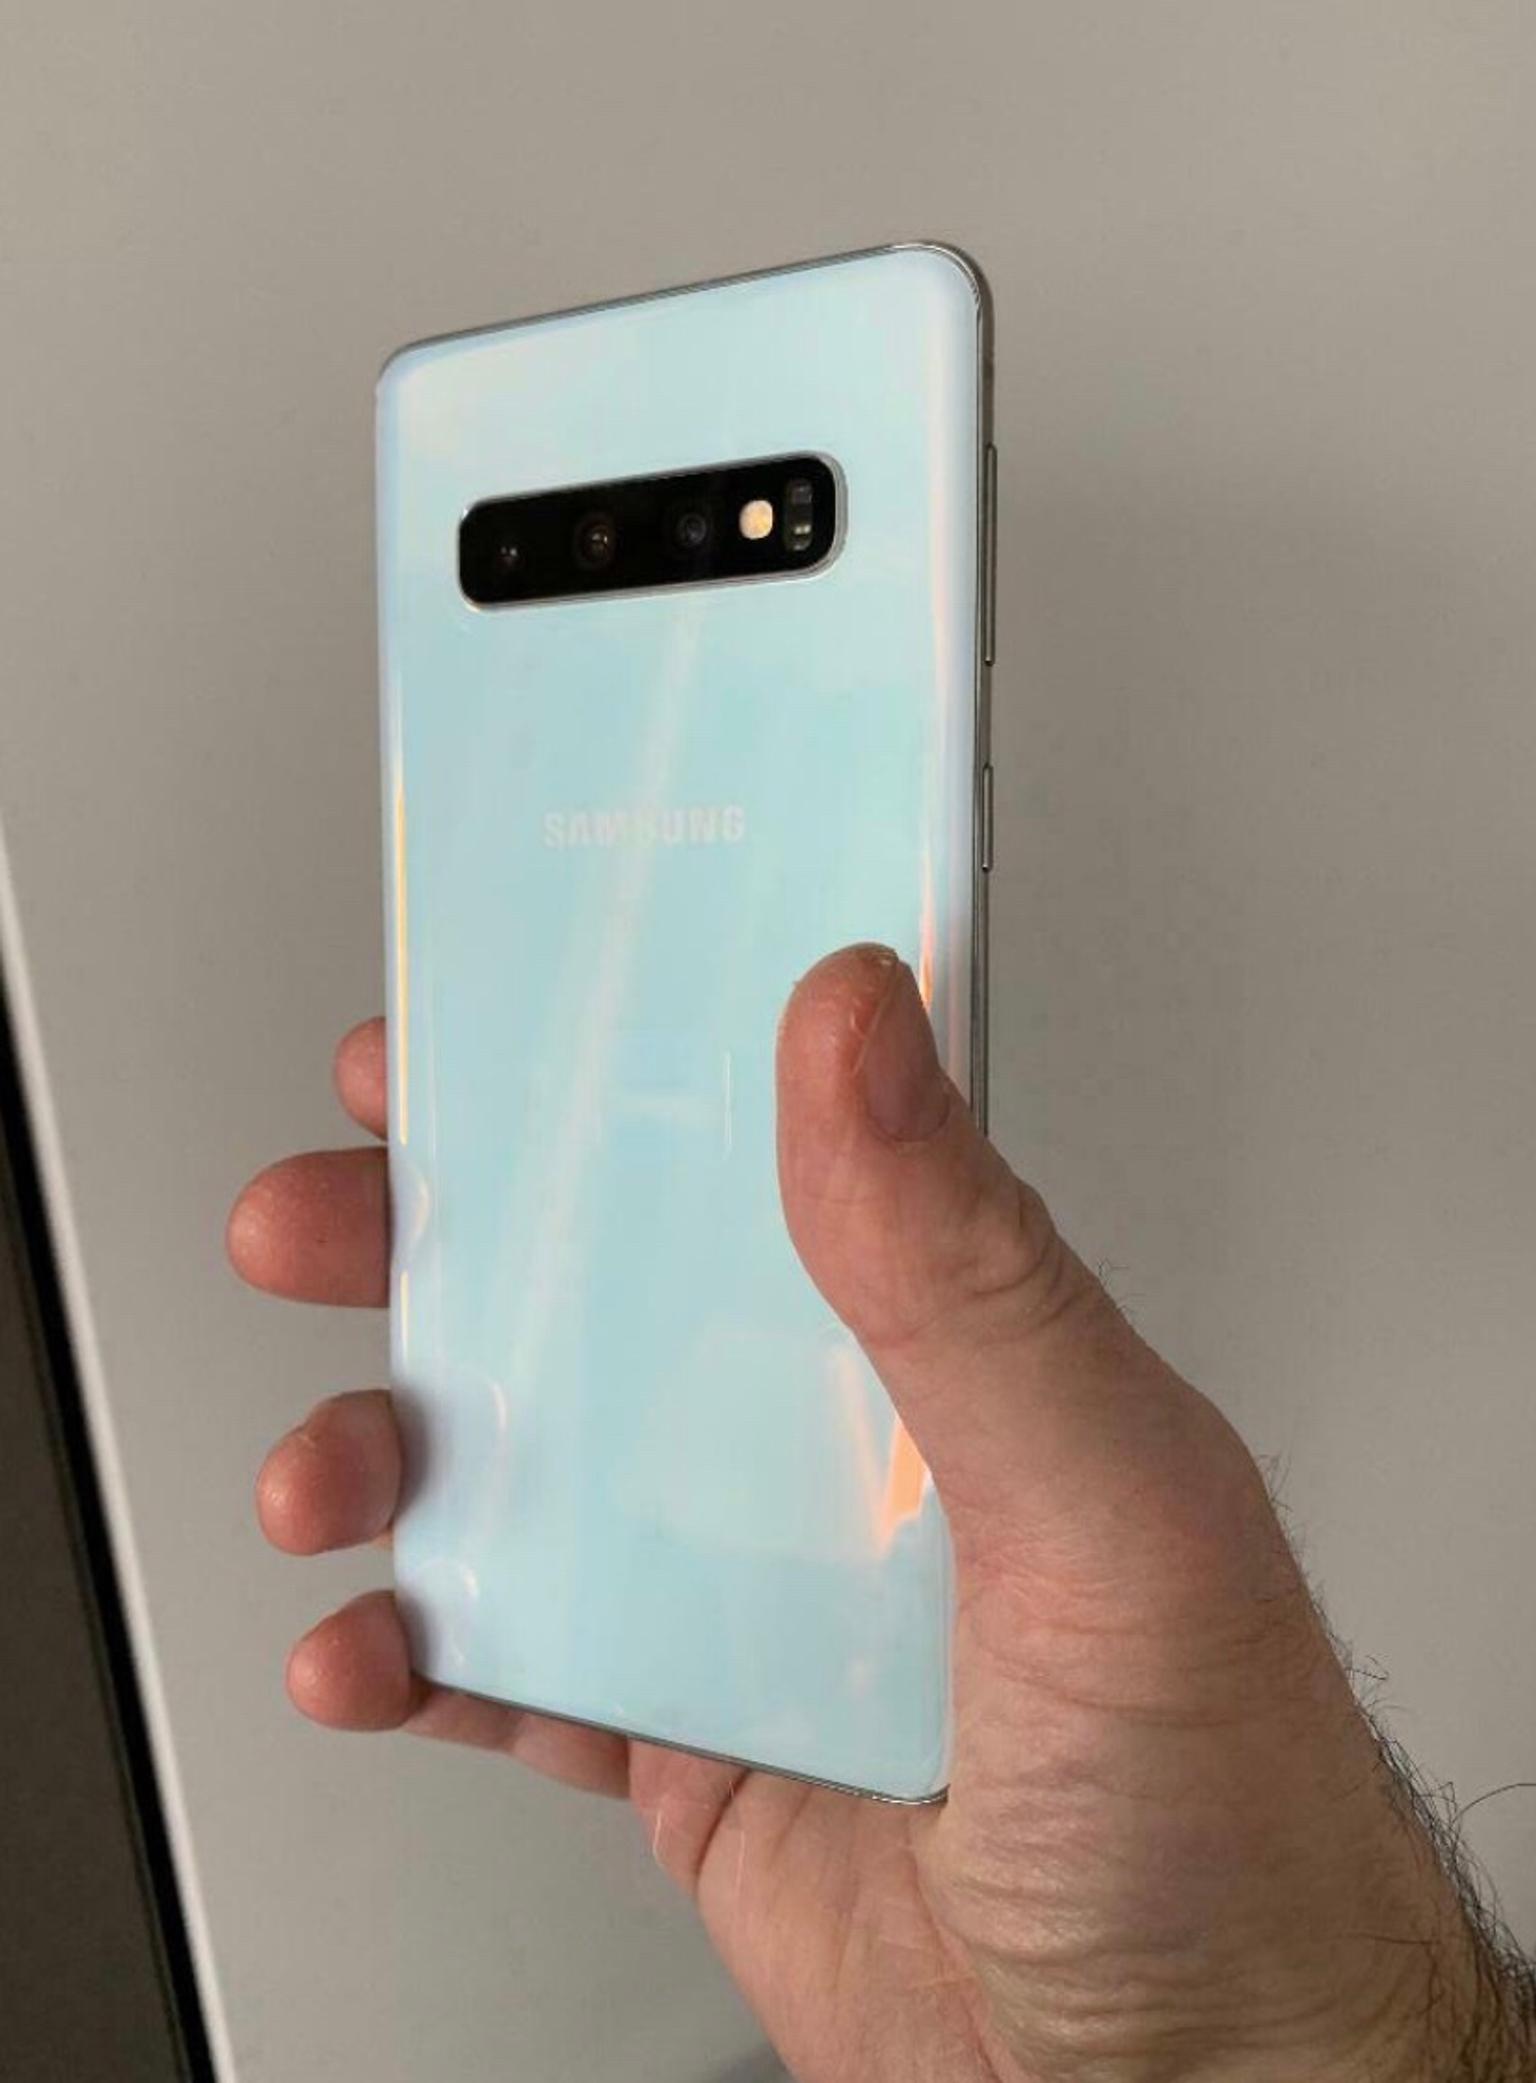 Galaxy s10 Plus prism white in London for £680.00 for sale | Shpock